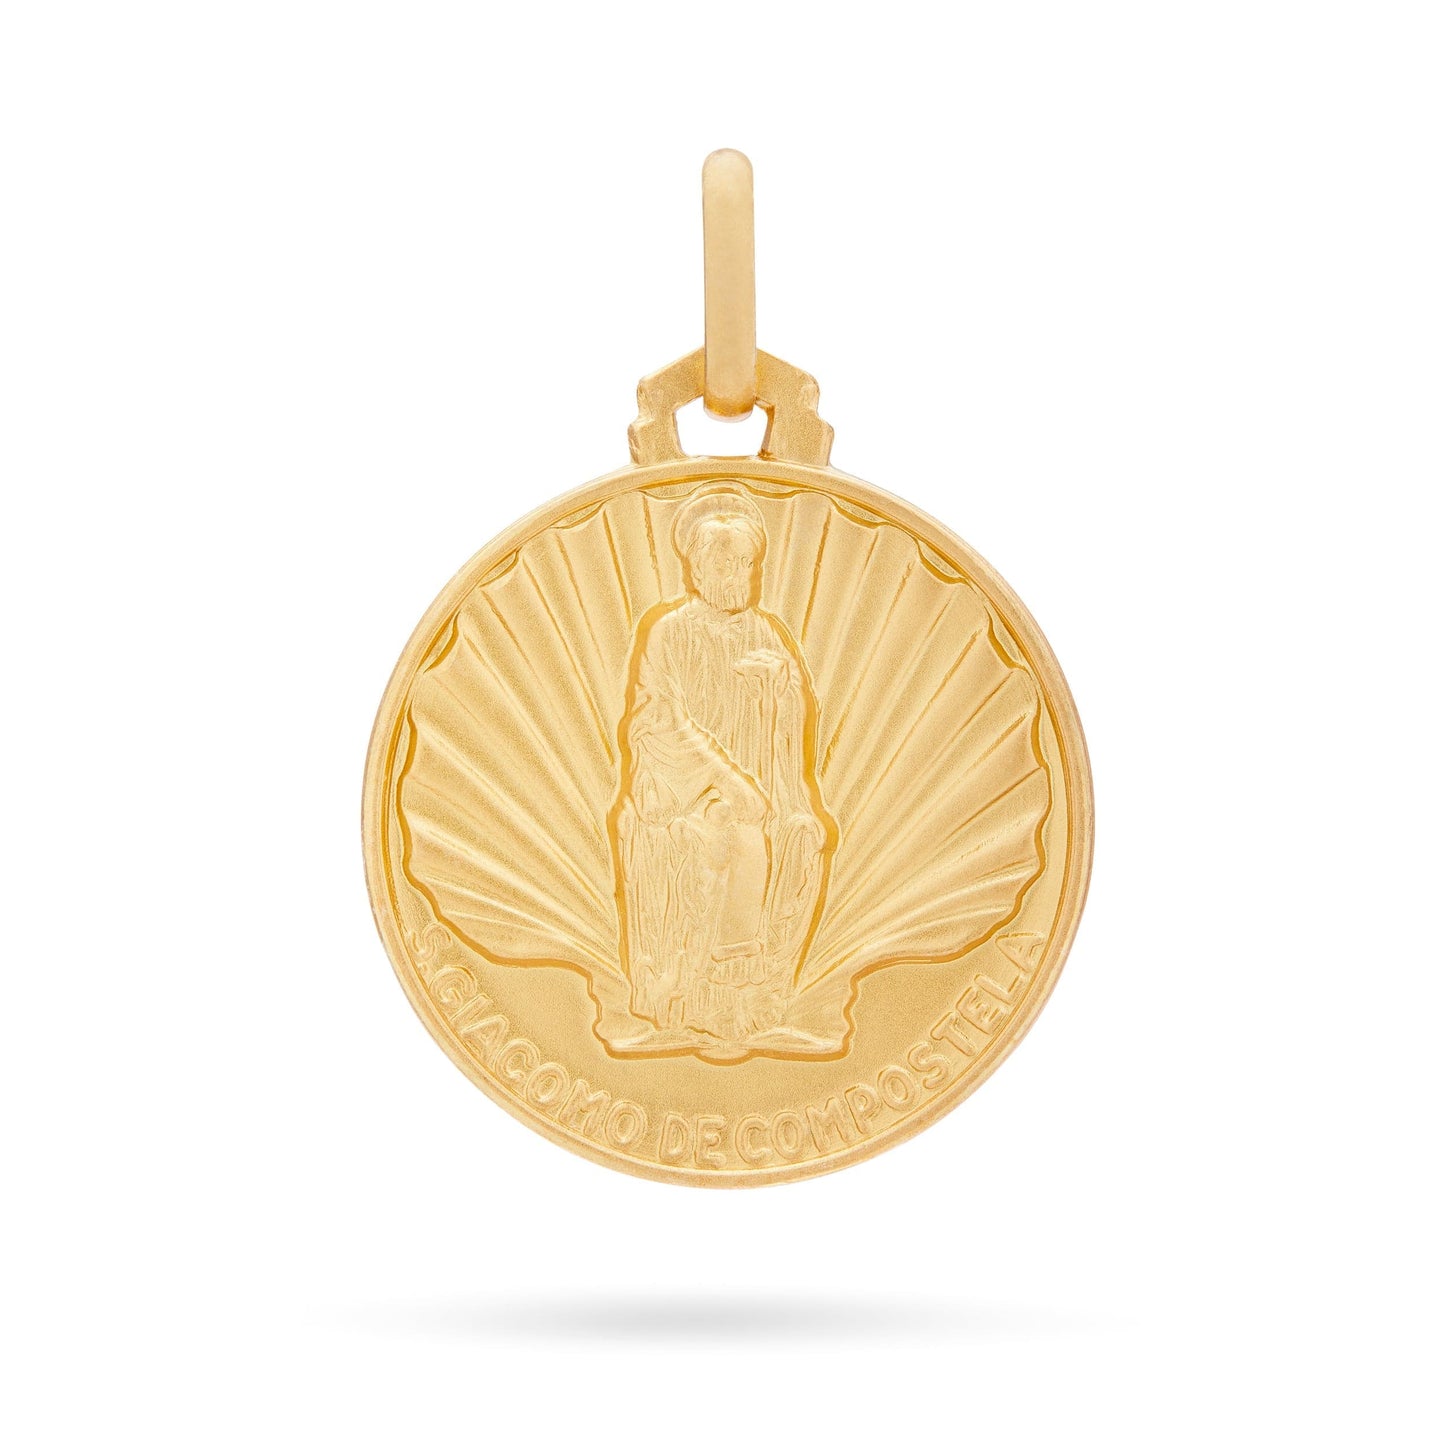 MONDO CATTOLICO Jewelry 18 mm (0.70 in) Gold medal of Saint James of Compostela